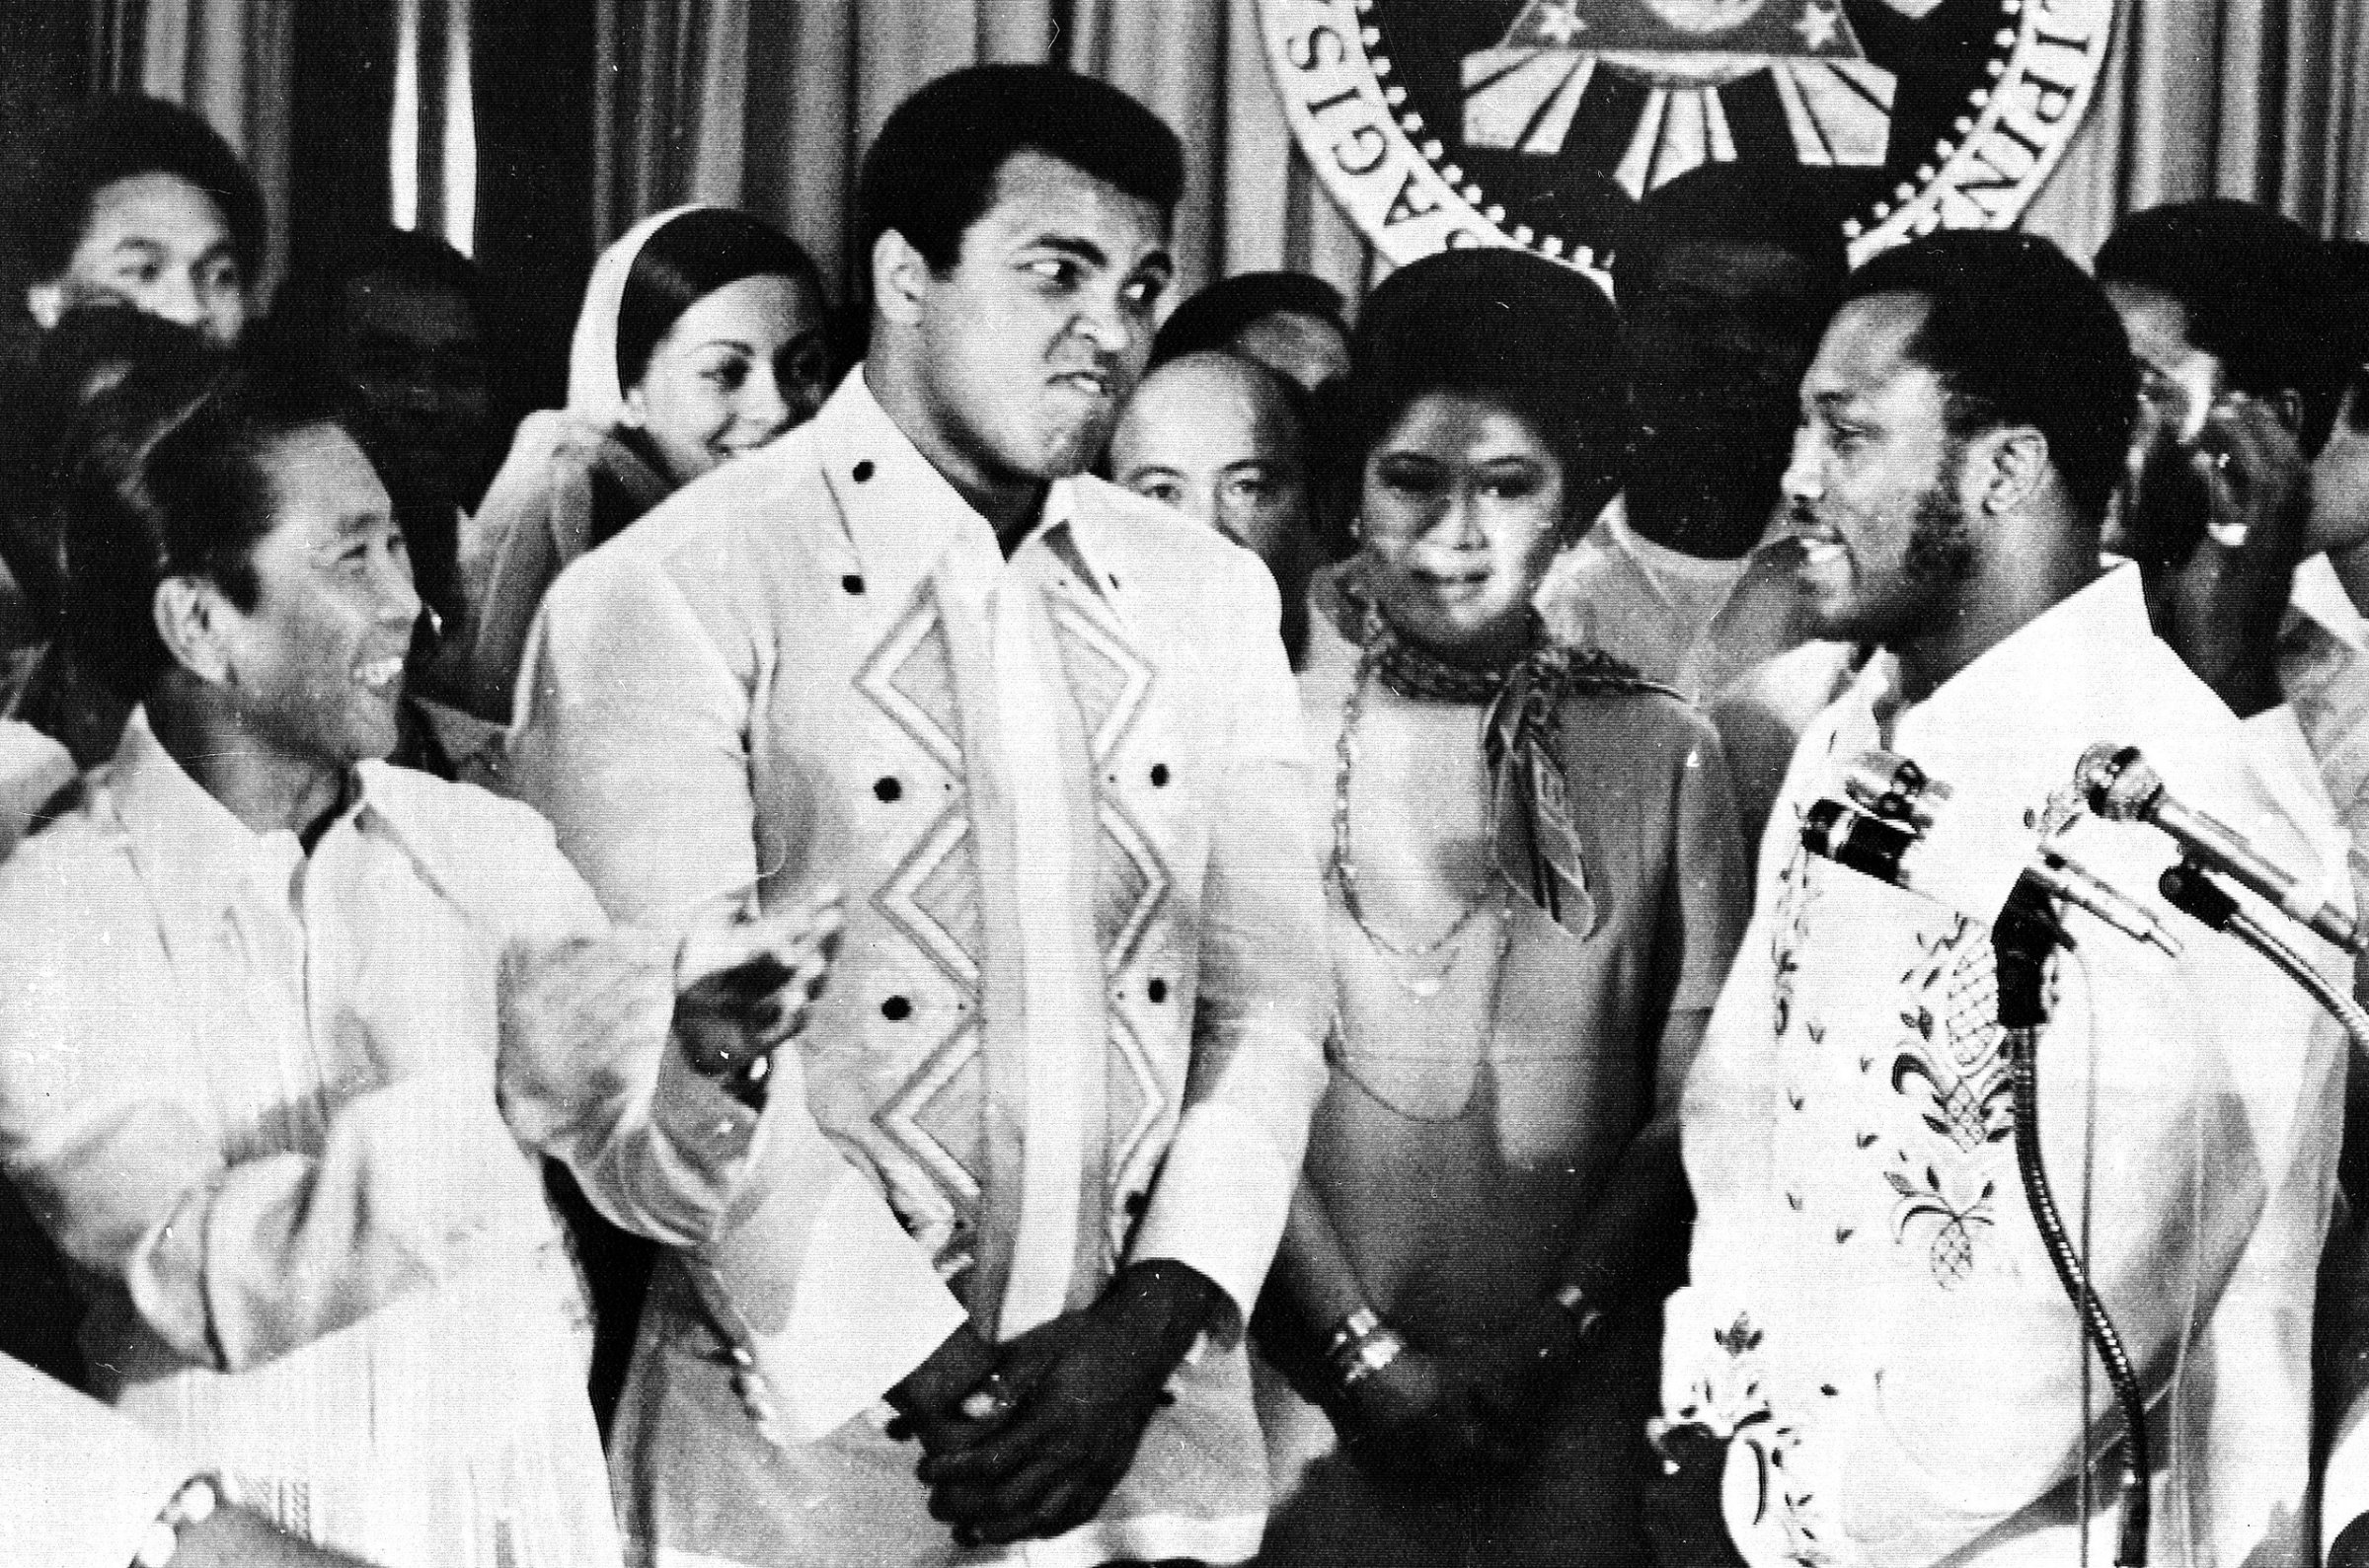 Philippines President Ferdinand Marcos, left, applauds as challenger Joe Frazier, right, makes some remarks about world champion Muhammad Ali, second from left, during their call on Marcos at the Malacanang Palace in Manila, Philippines, on Sept. 18, 1975. Between the two fighters is Marco's wife Imelda.